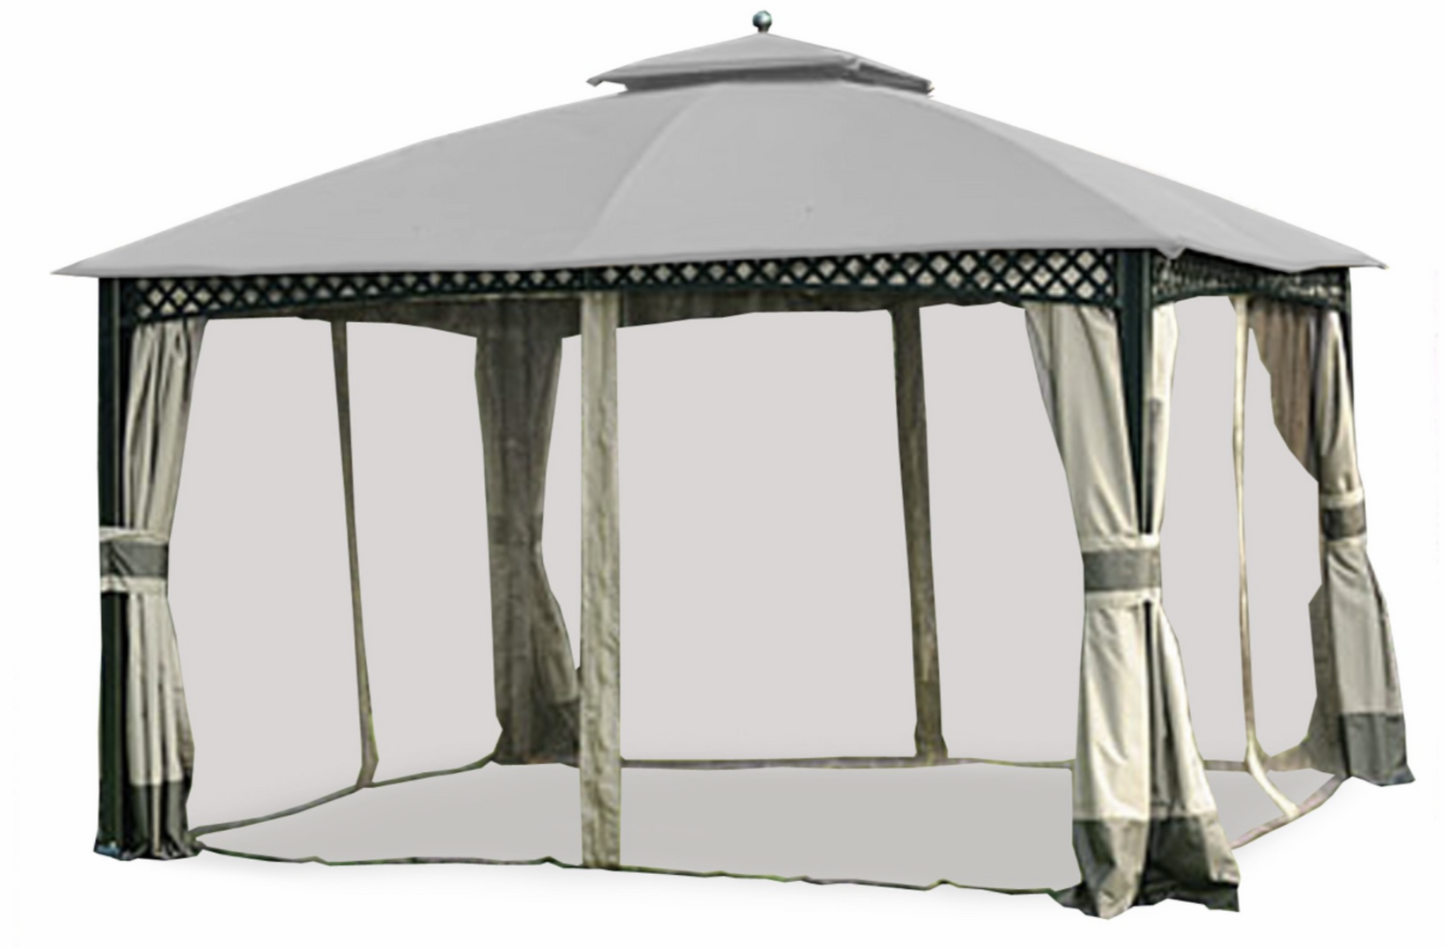 Windsor Original Replacement L-GZ717PST-C 10x12 Canopy for Windsor Sold at Big Lots Beige